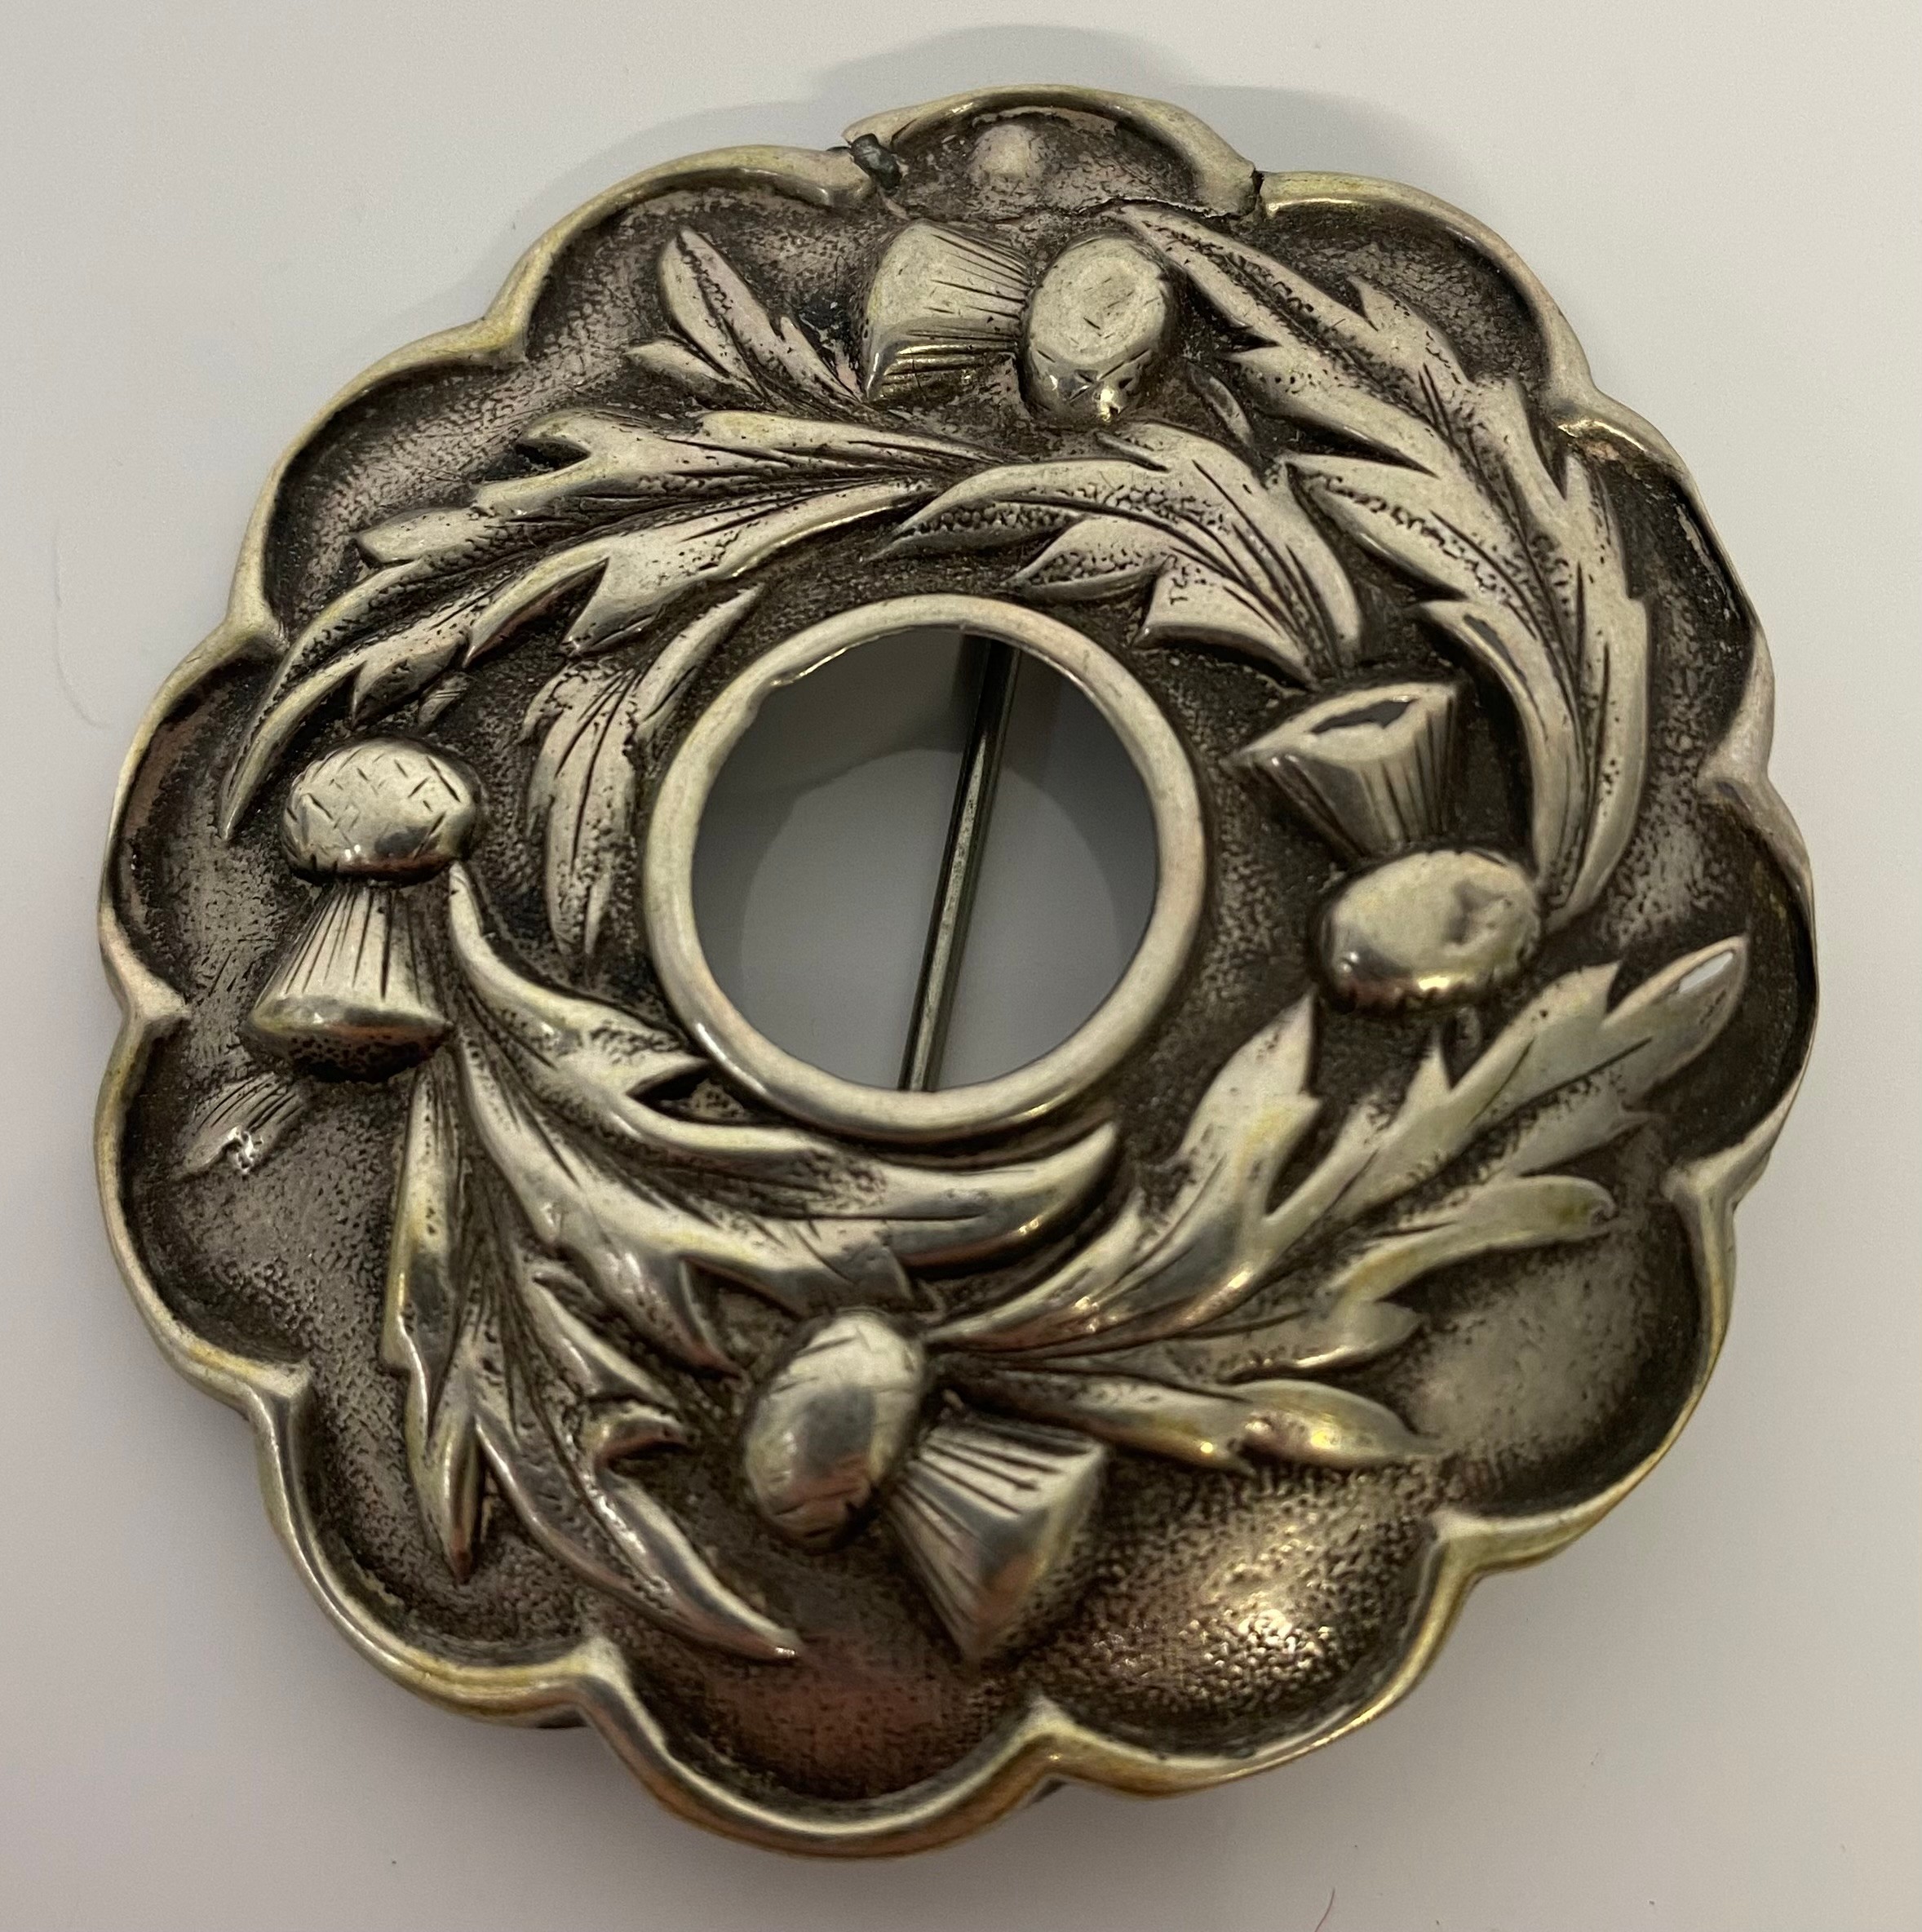 Four Silver brooches and one other; Plated Victorian thistle design brooch, Glasgow silver ornate - Image 2 of 8